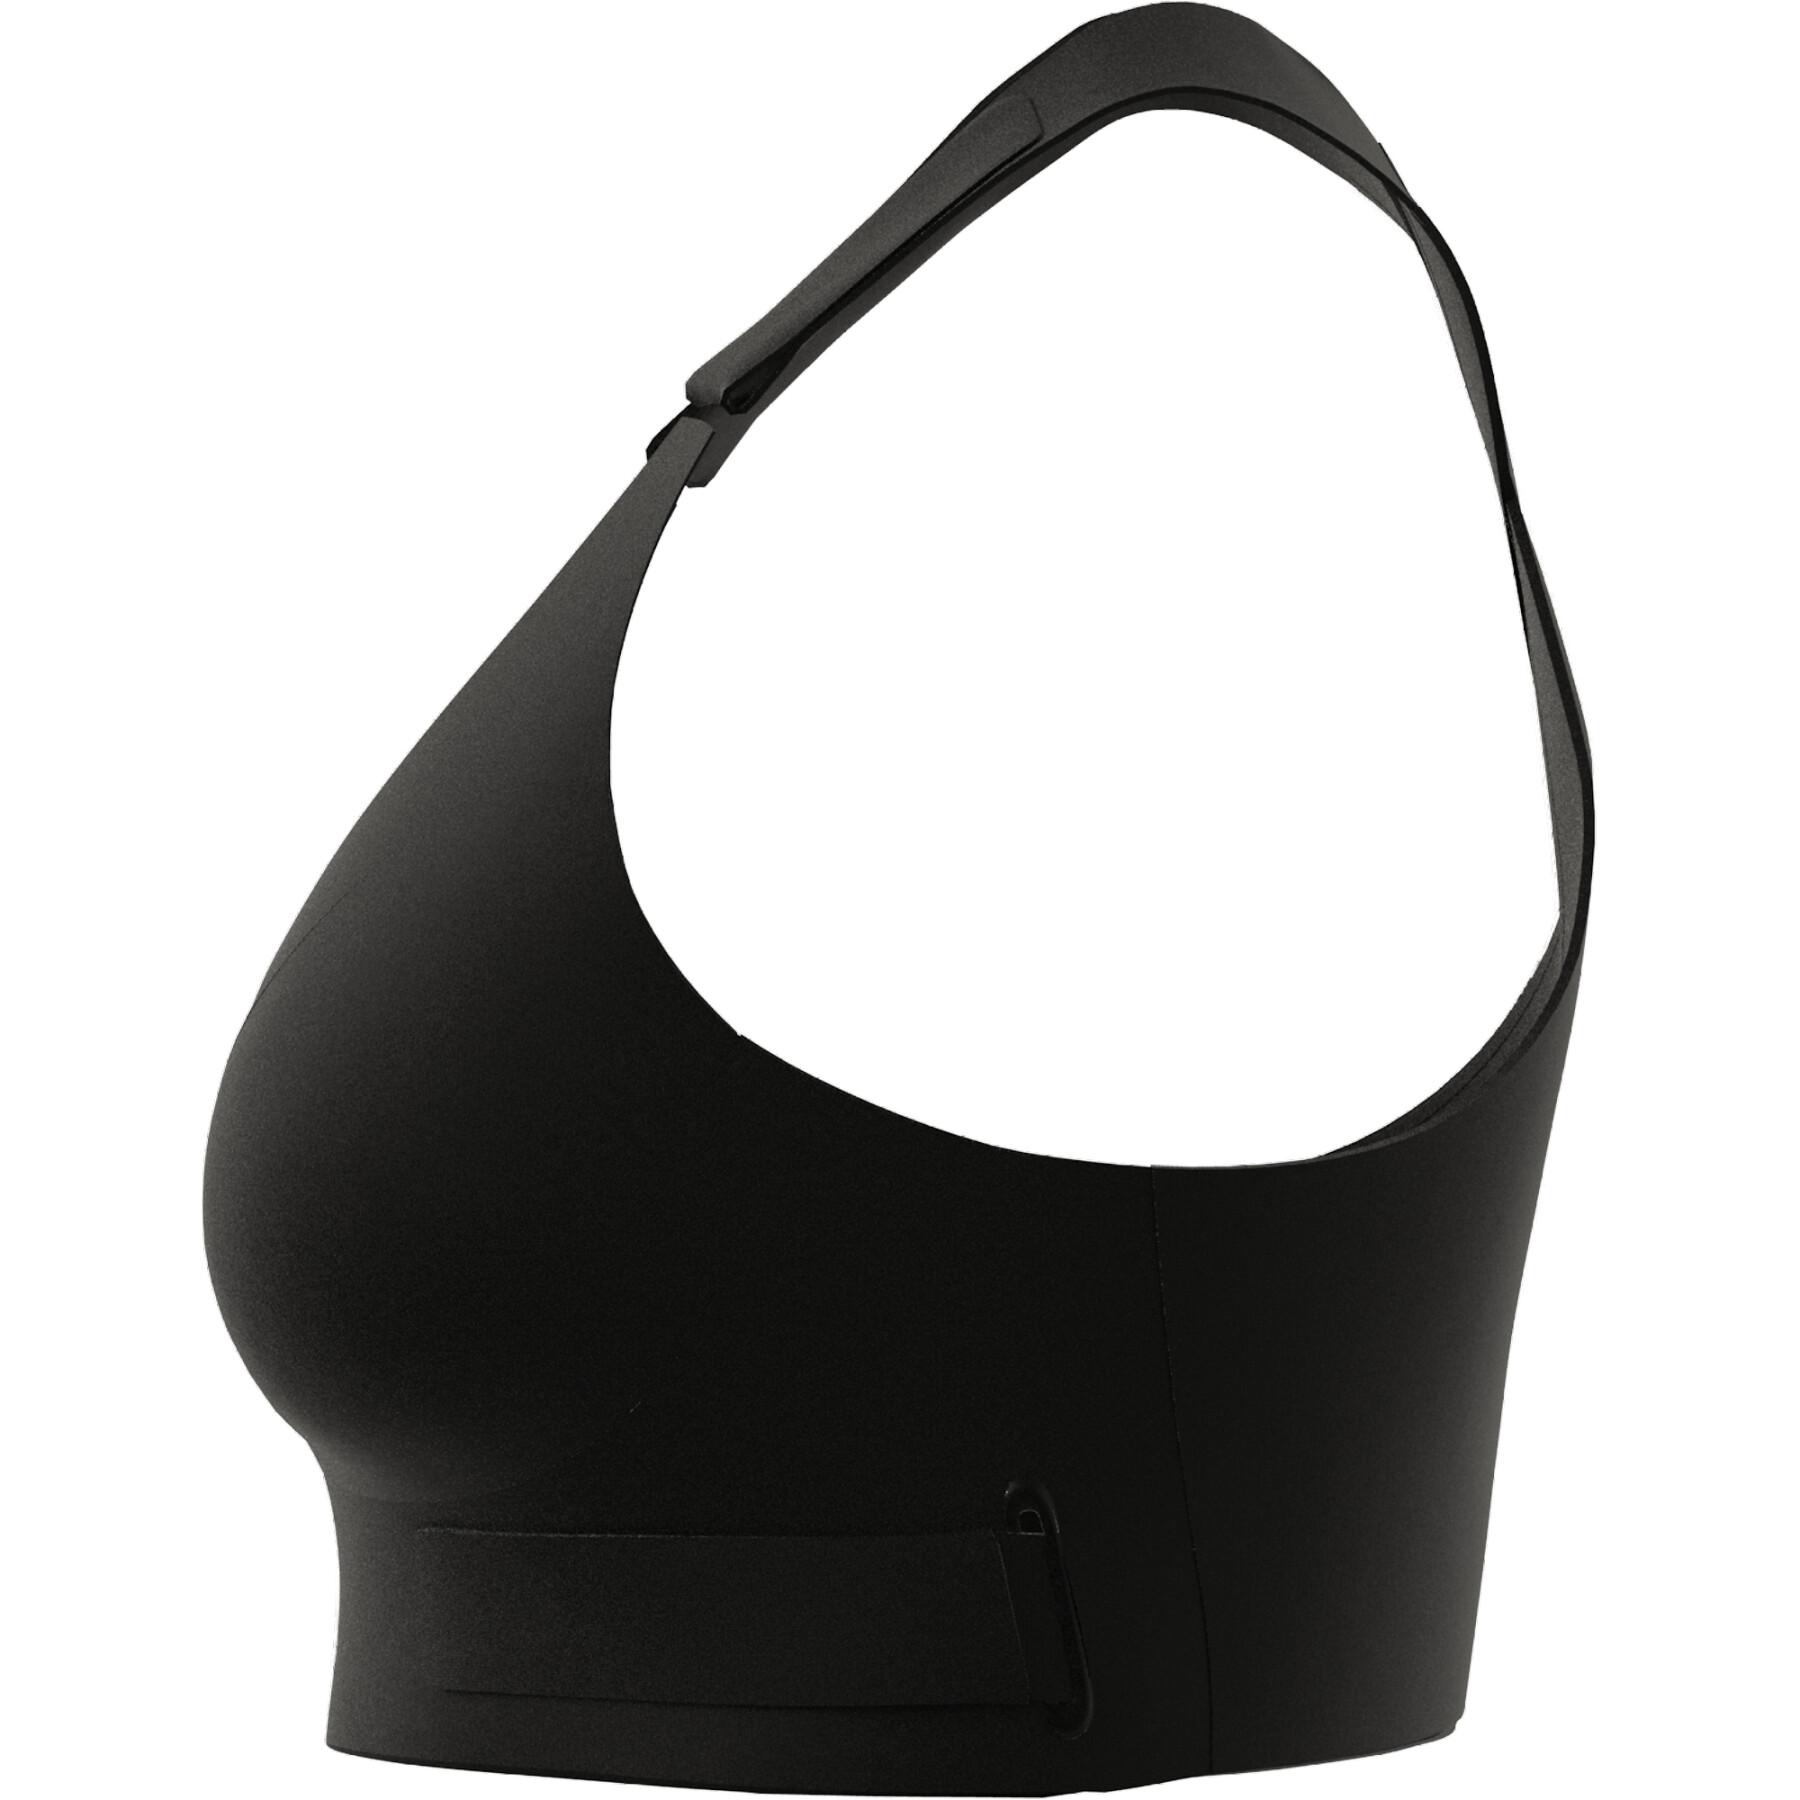 Brassière femme adidas Fastimpact Luxe Run High-Support